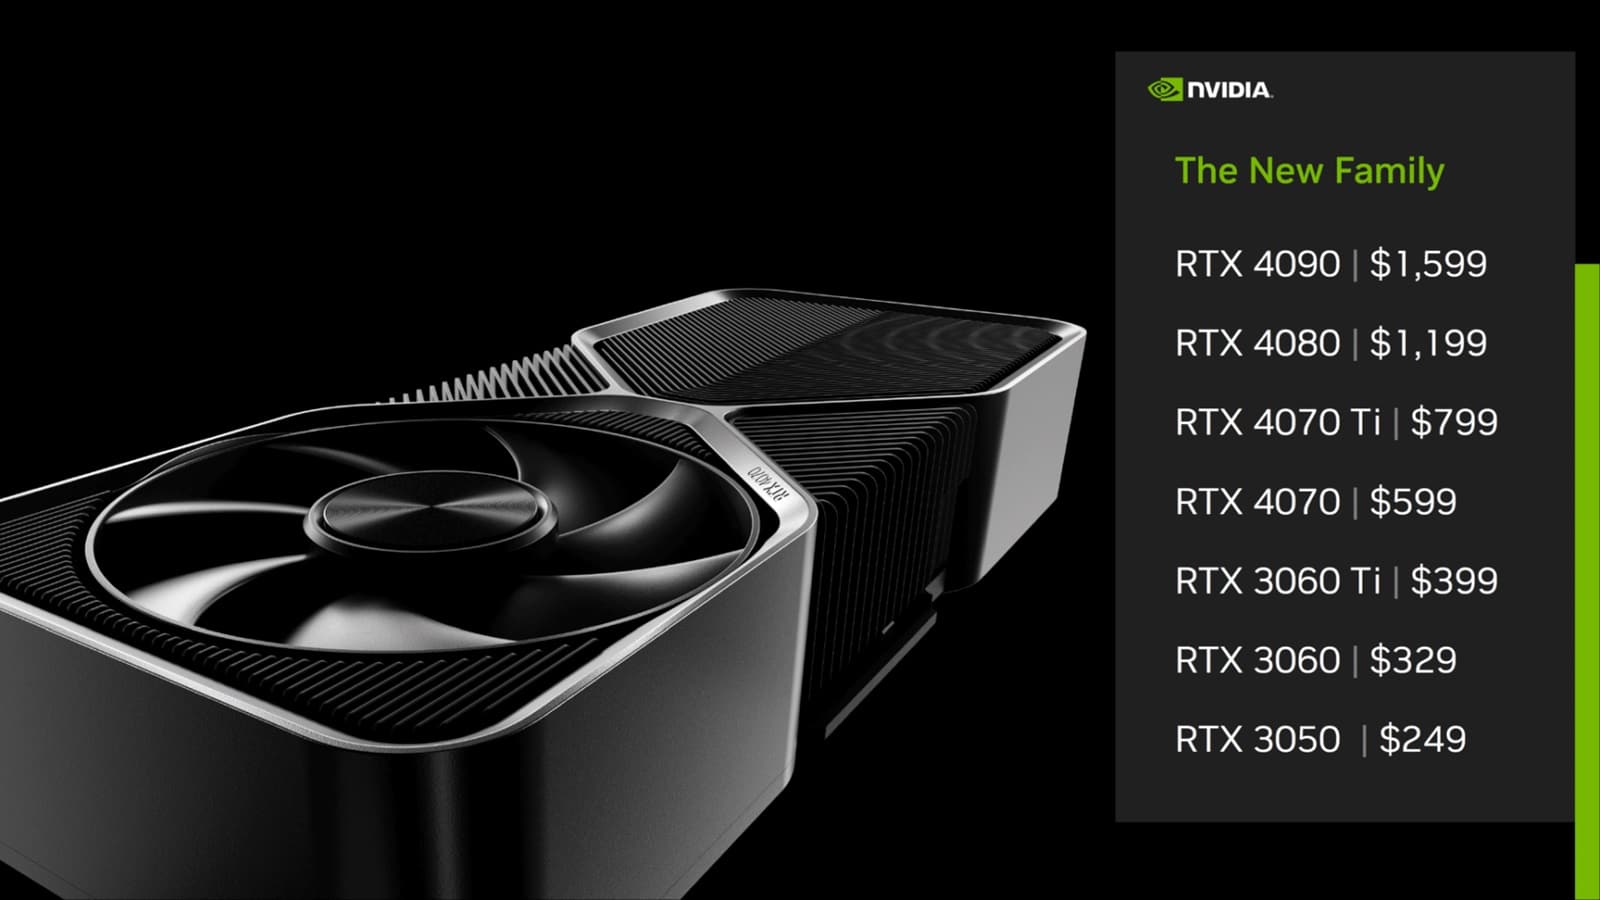 Nvidia GeForce RTX 4070 Ti SUPER Graphics Card Packaging and Specs Leak  Ahead of Launch